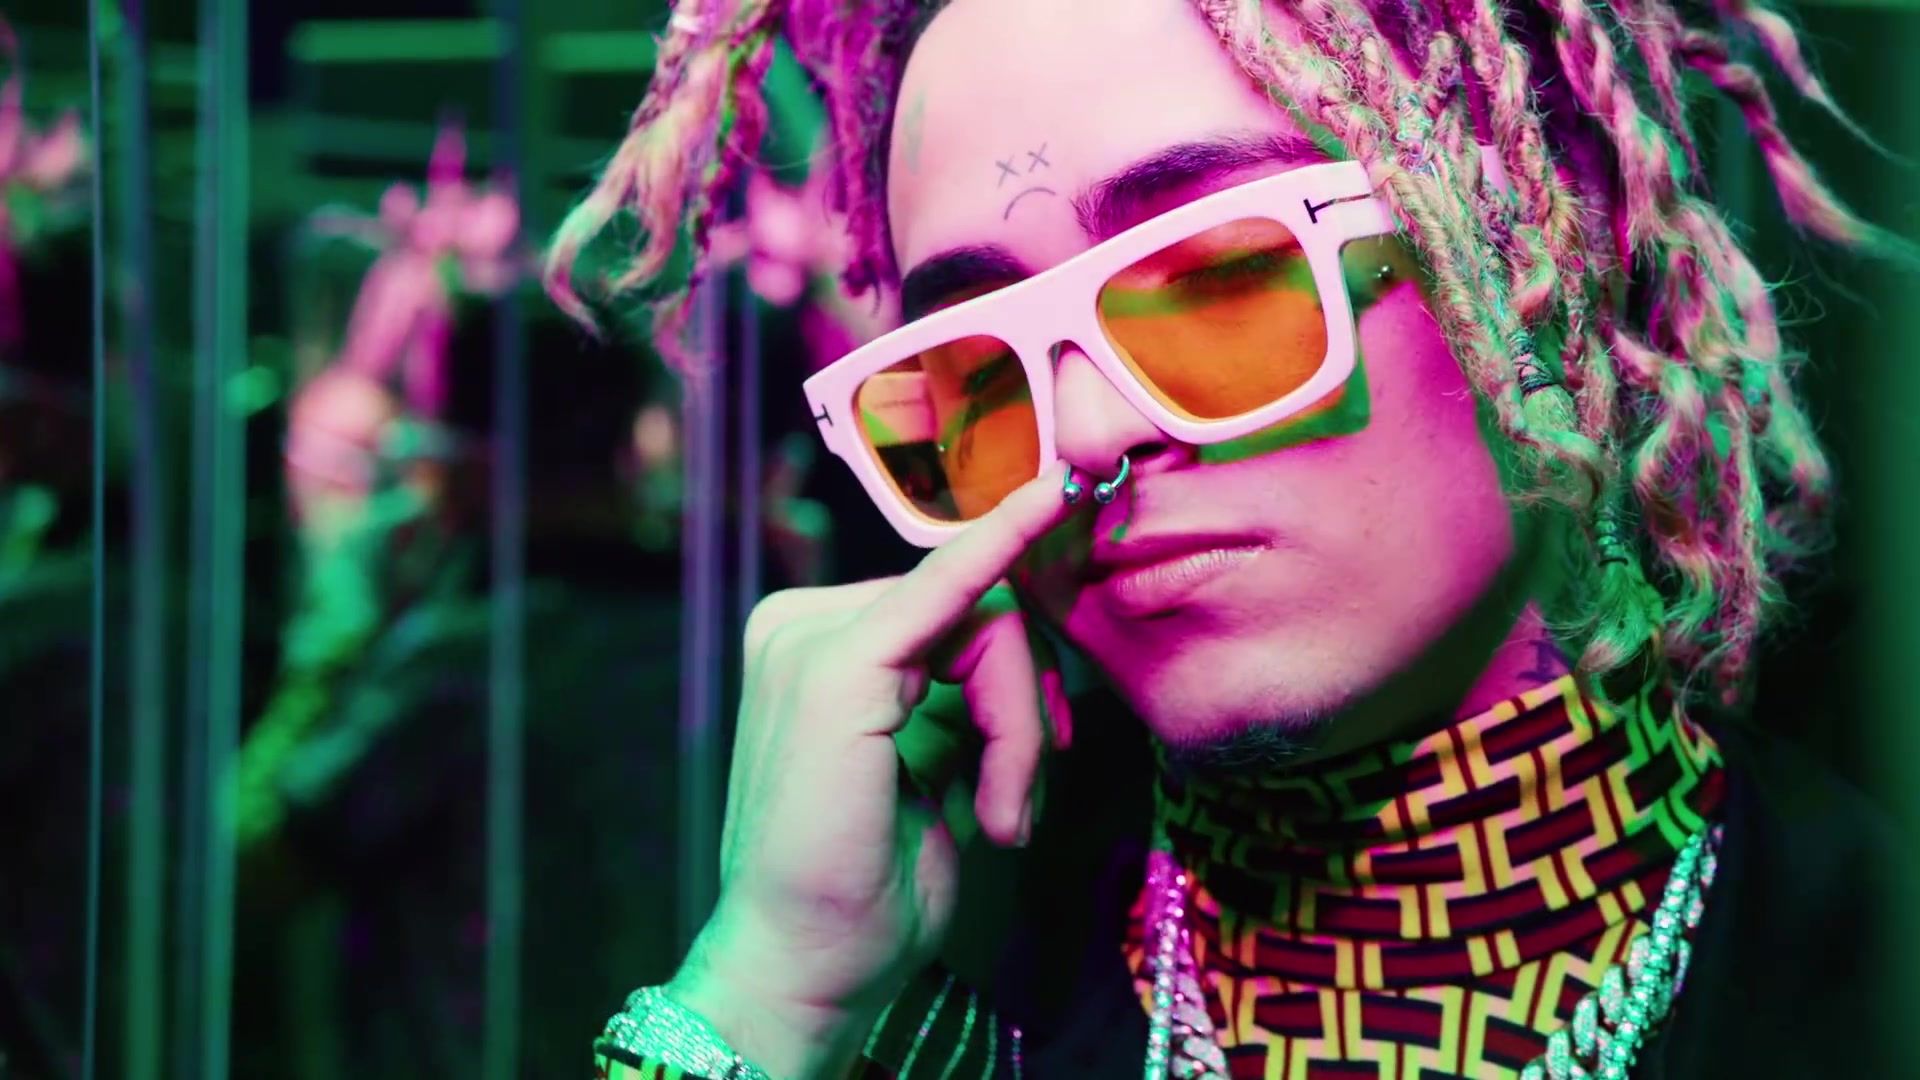 Lil Pump Be Like Me Wallpapers